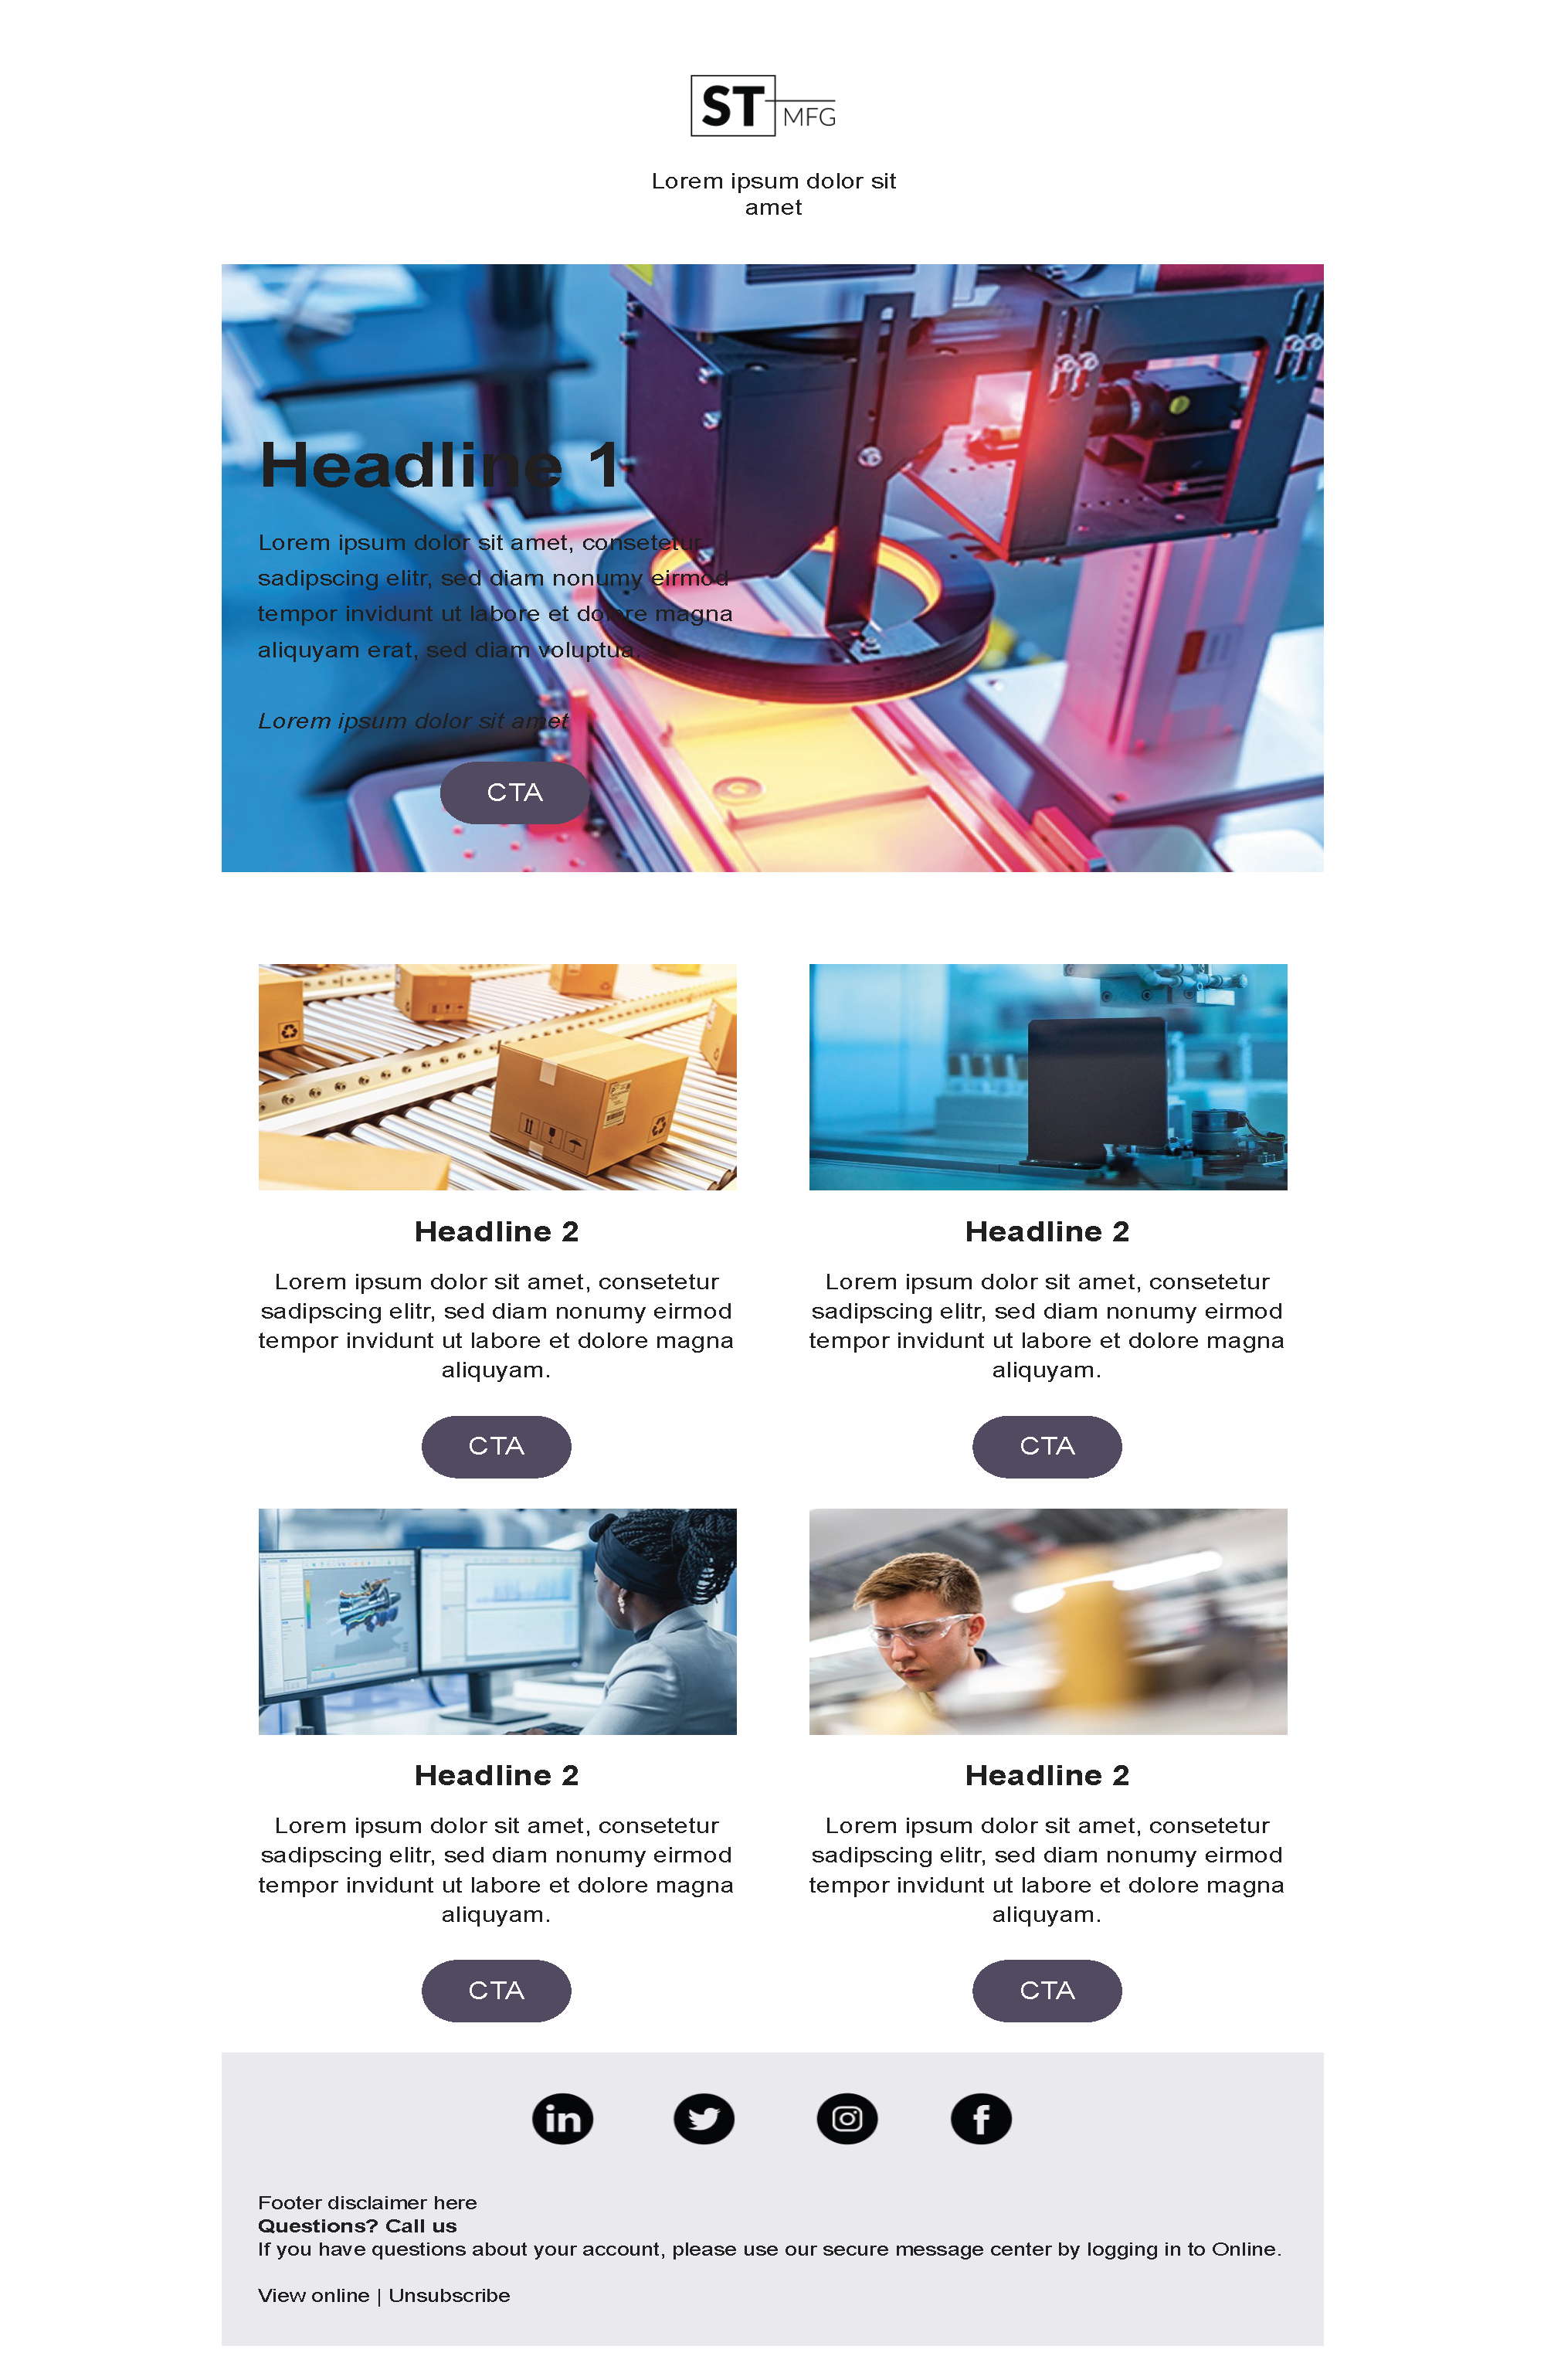 Product Update Templates 2 for a Manufacturing company